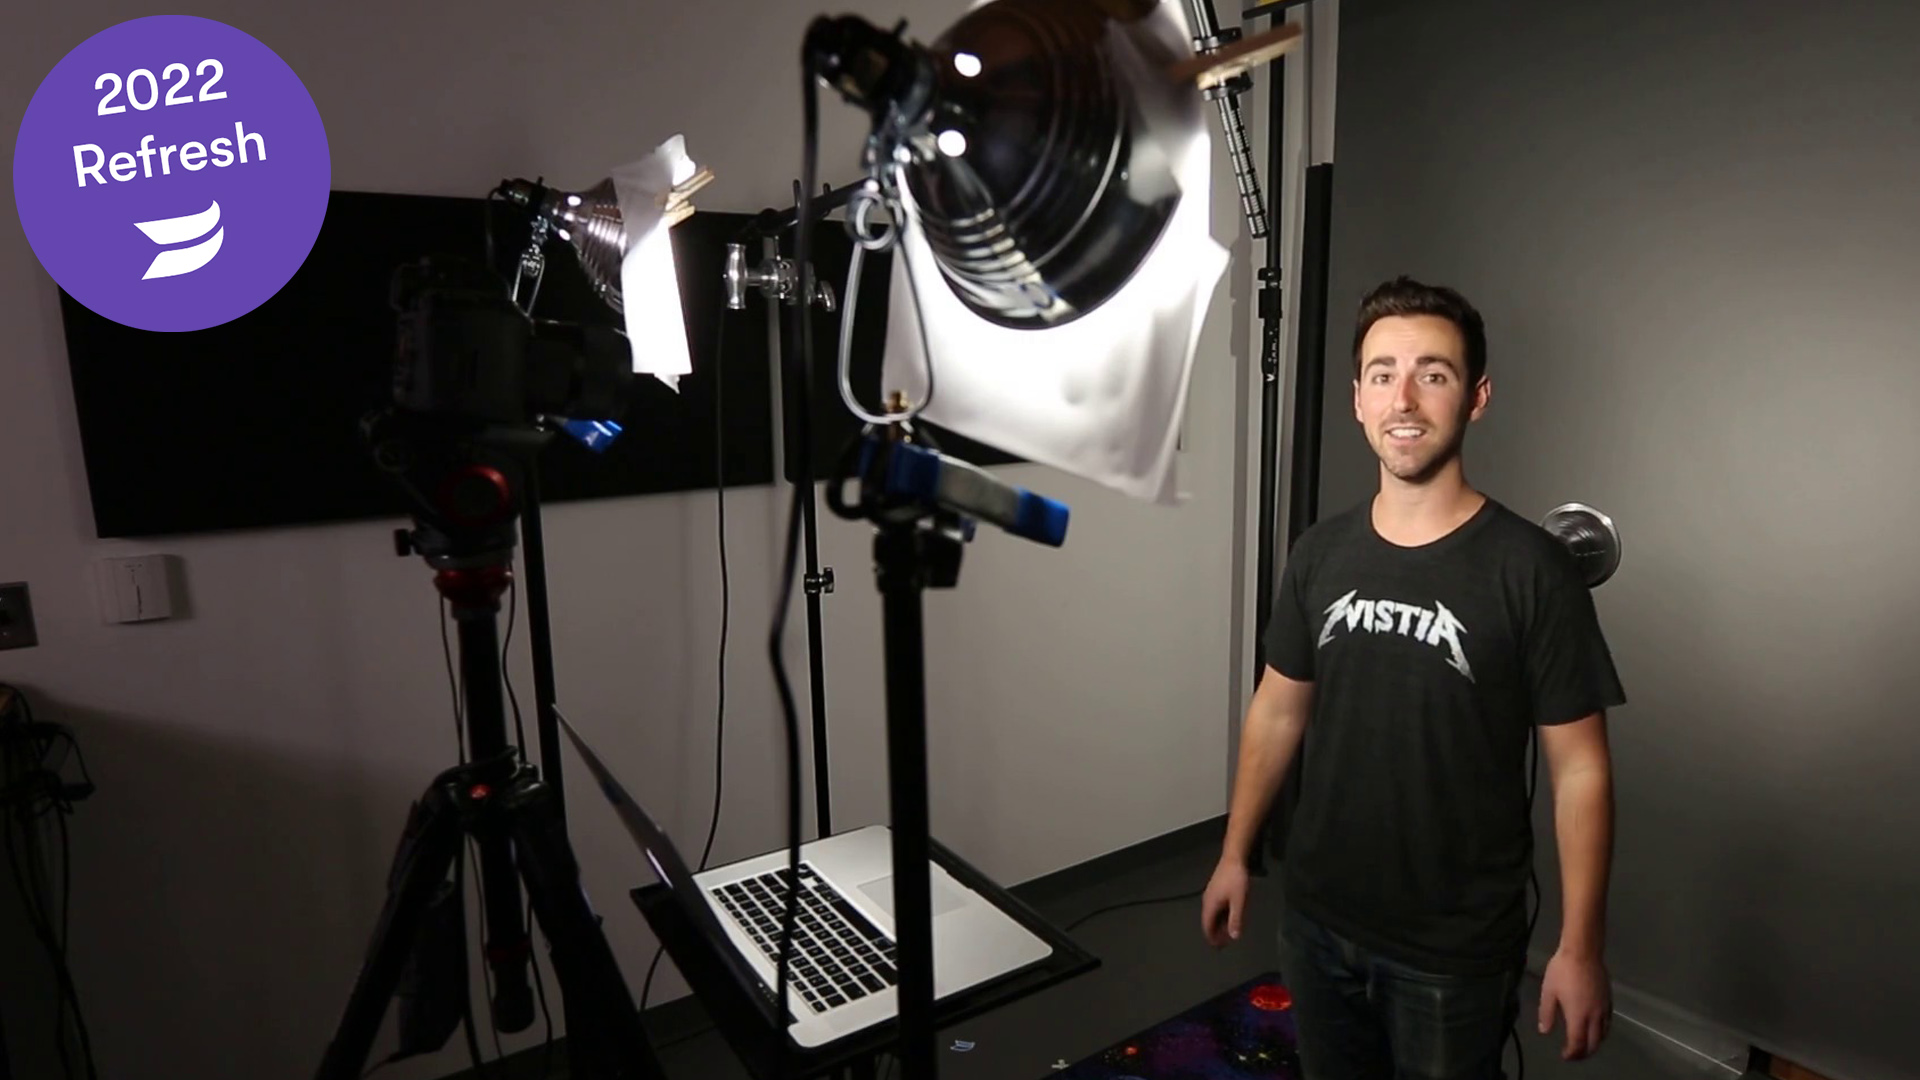 Lighting Equipment & Tips for  Videos to Make You Look Better